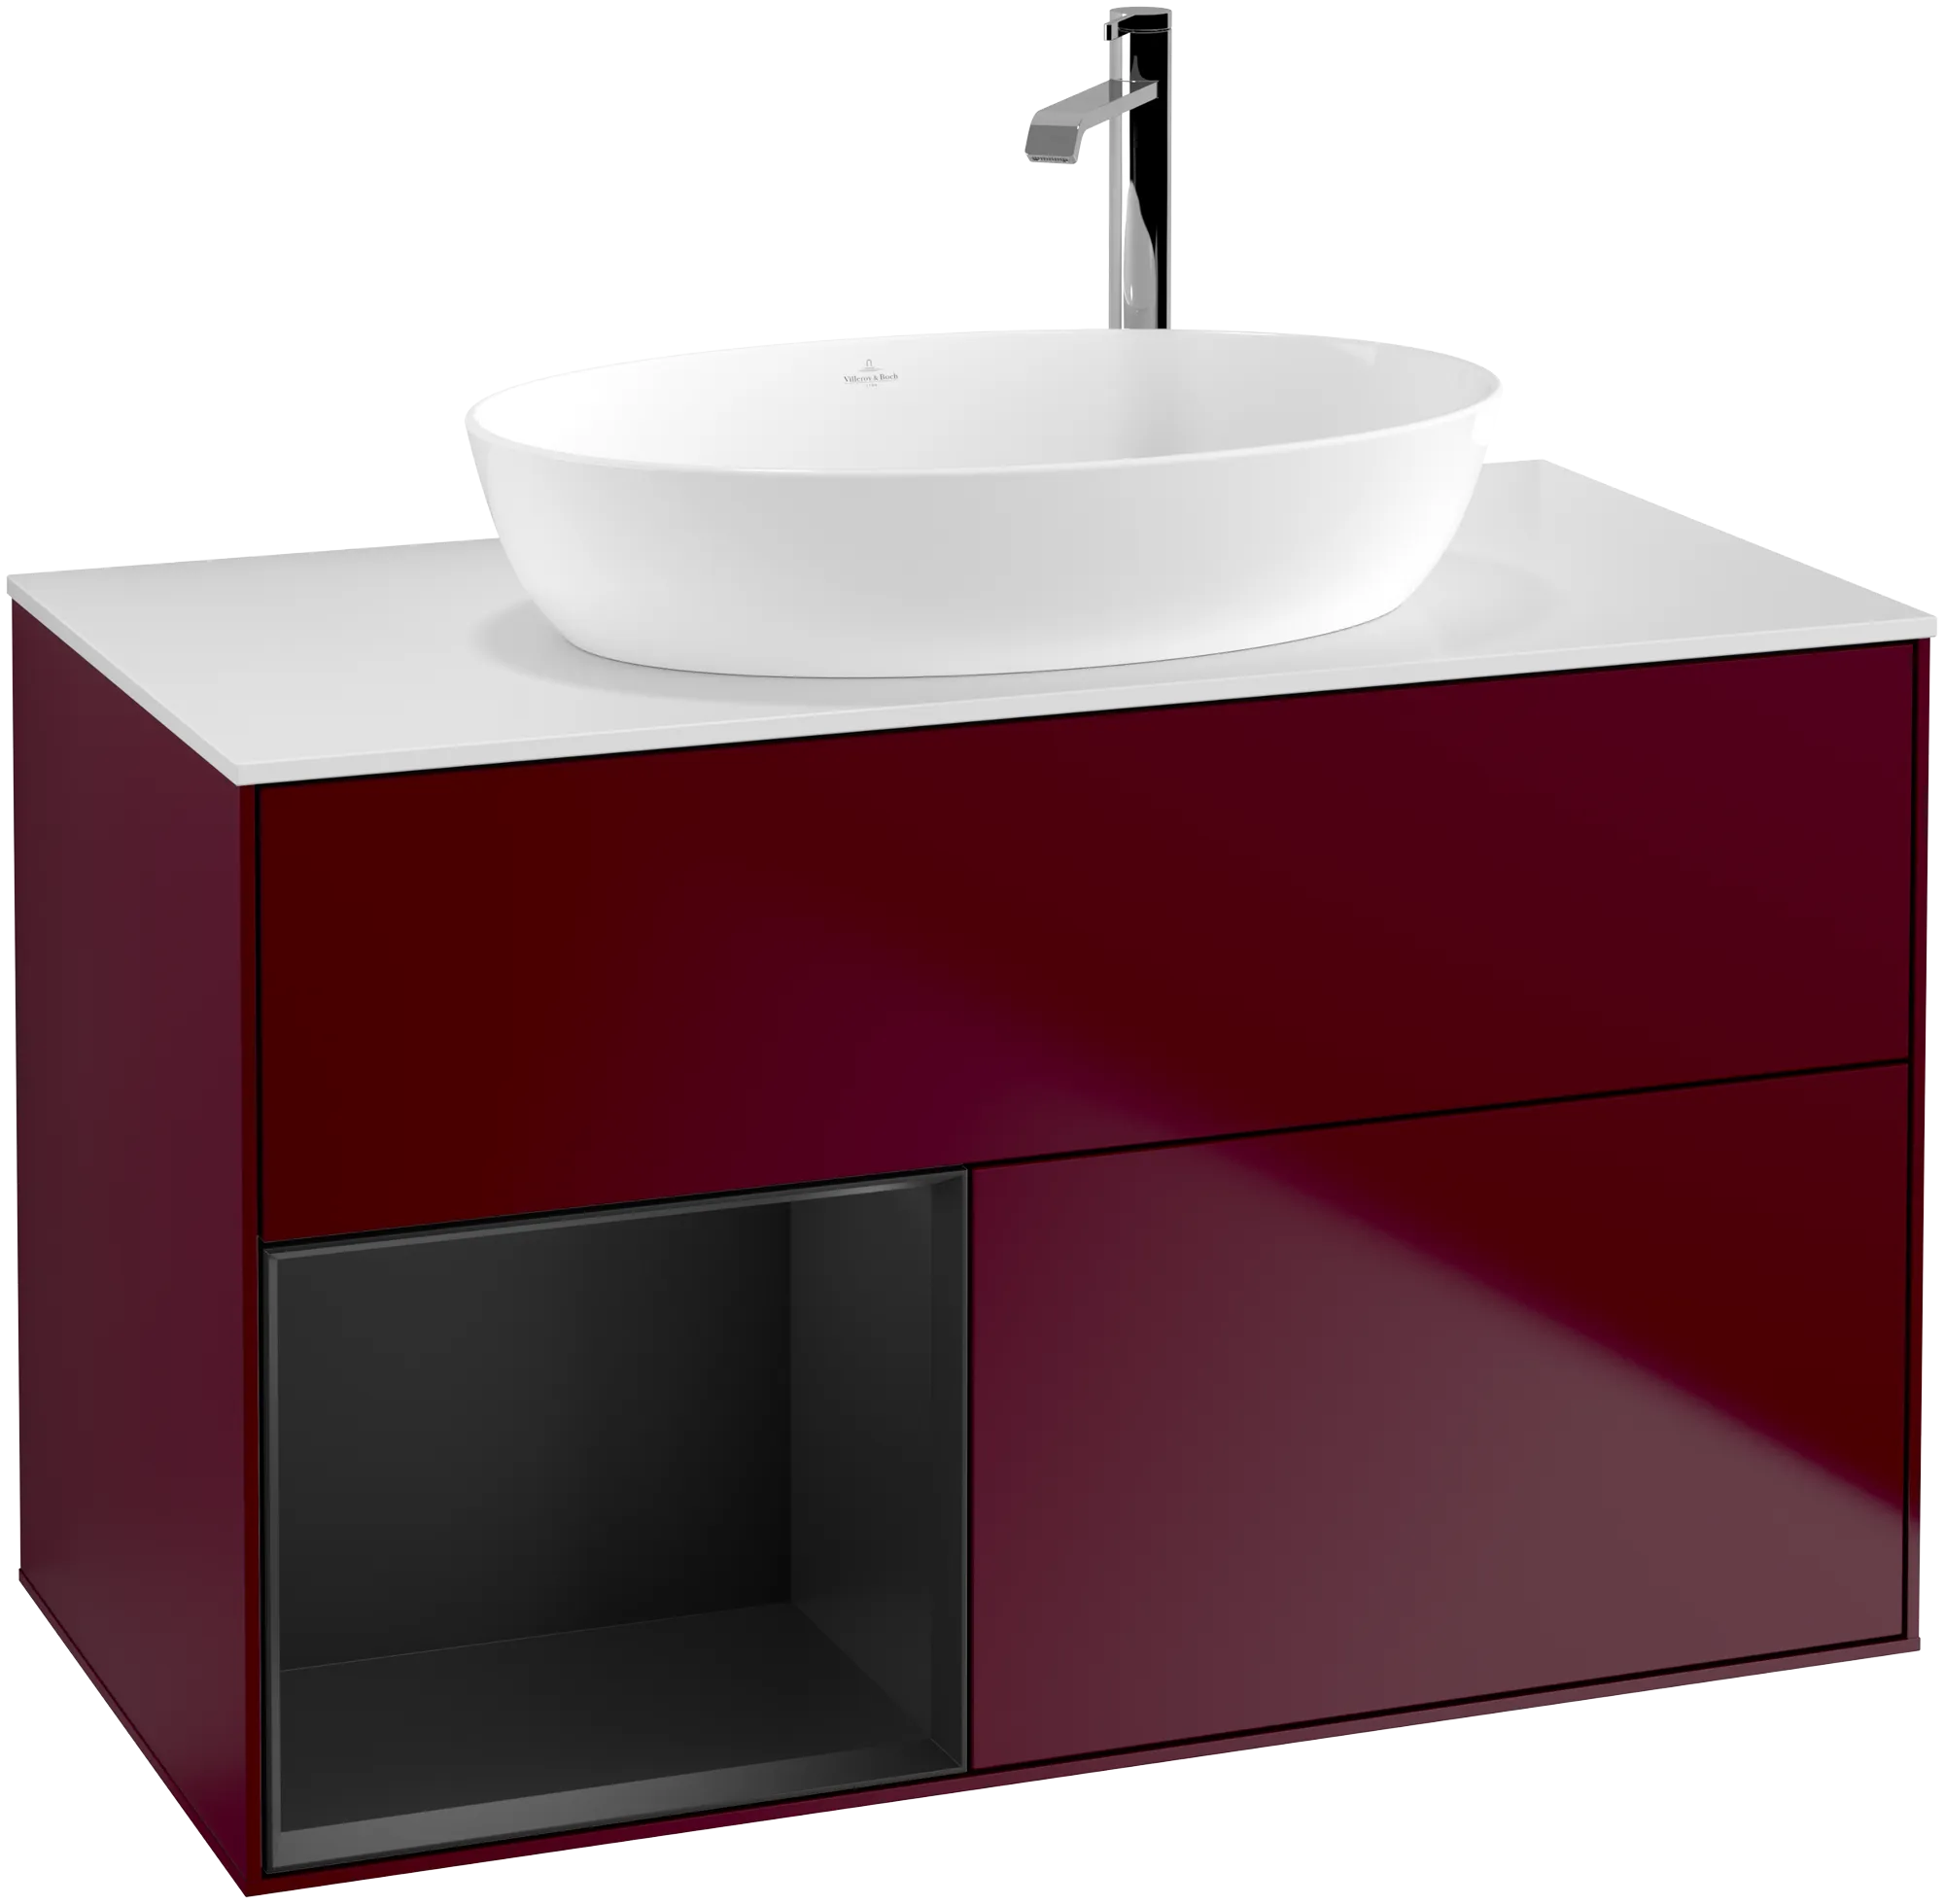 Picture of VILLEROY BOCH Finion Vanity unit, with lighting, 2 pull-out compartments, 1000 x 603 x 501 mm, Peony Matt Lacquer / Black Matt Lacquer / Glass White Matt #G891PDHB